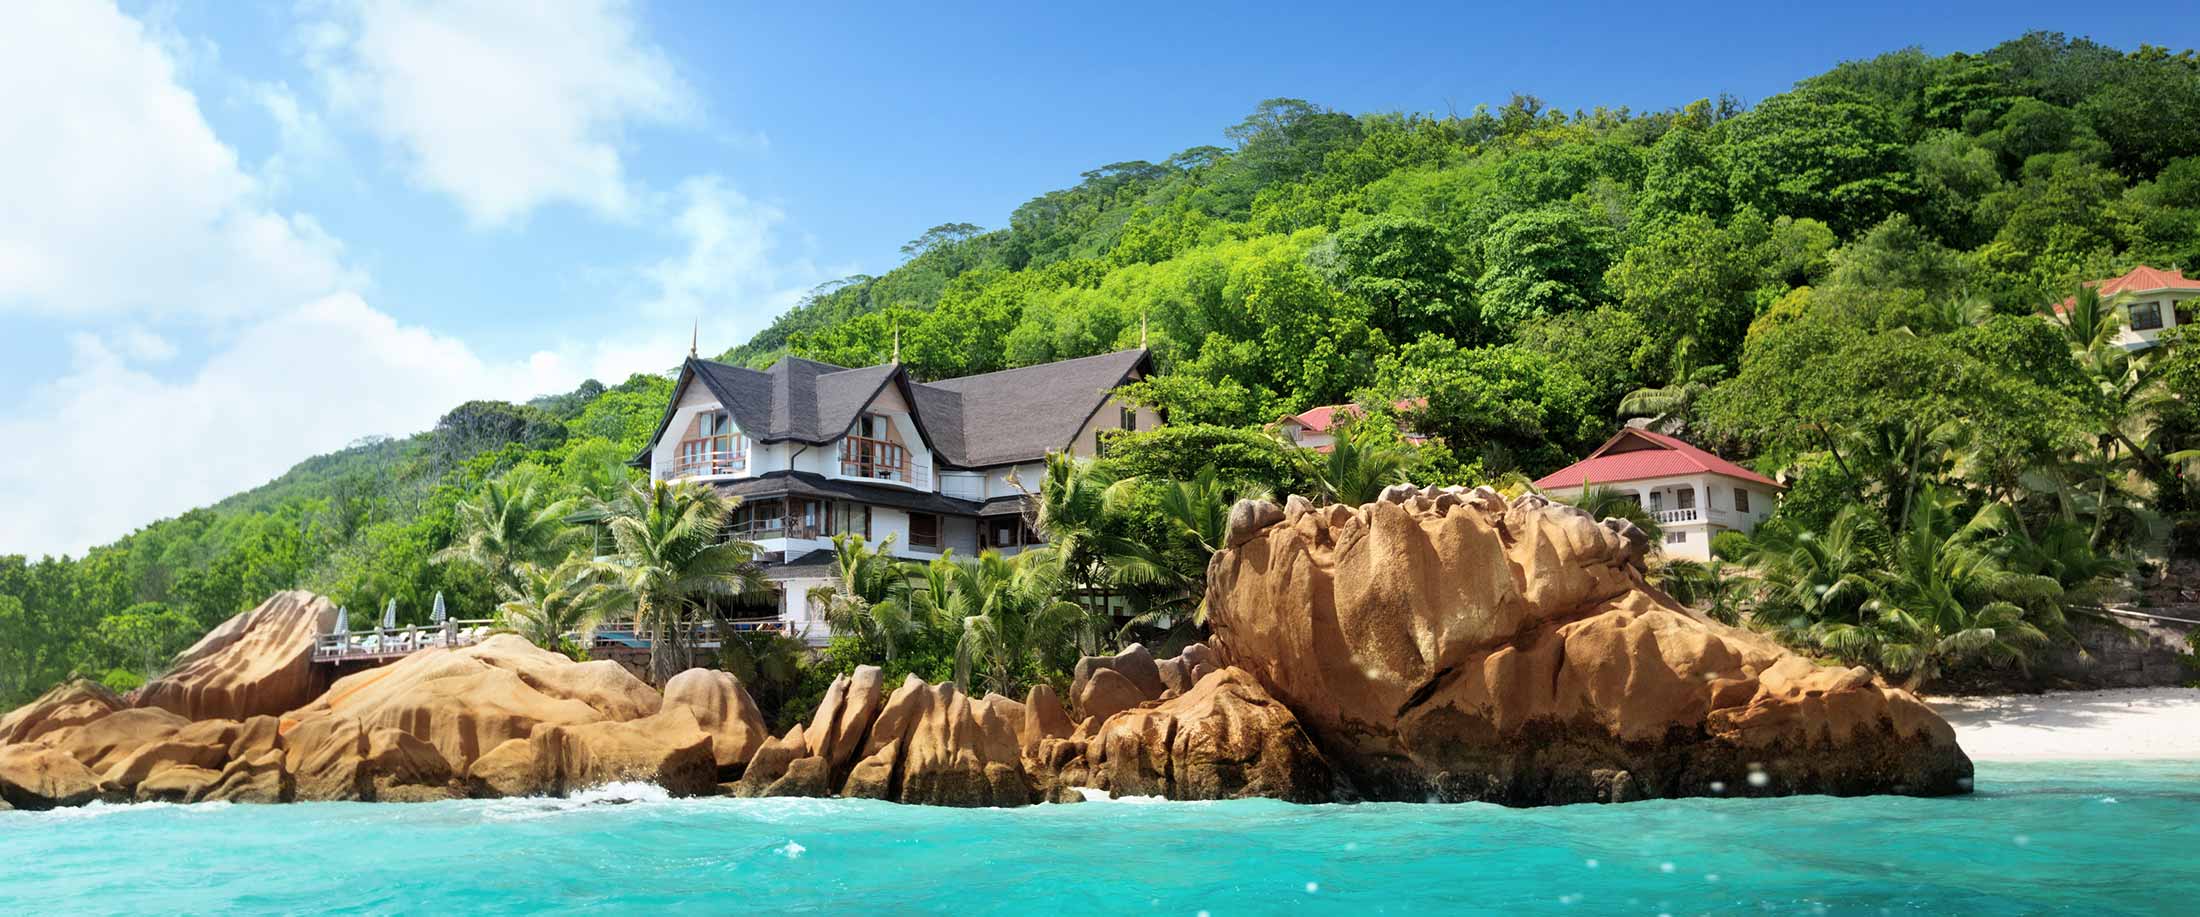 Hotels on La Digue in the Seychelles island